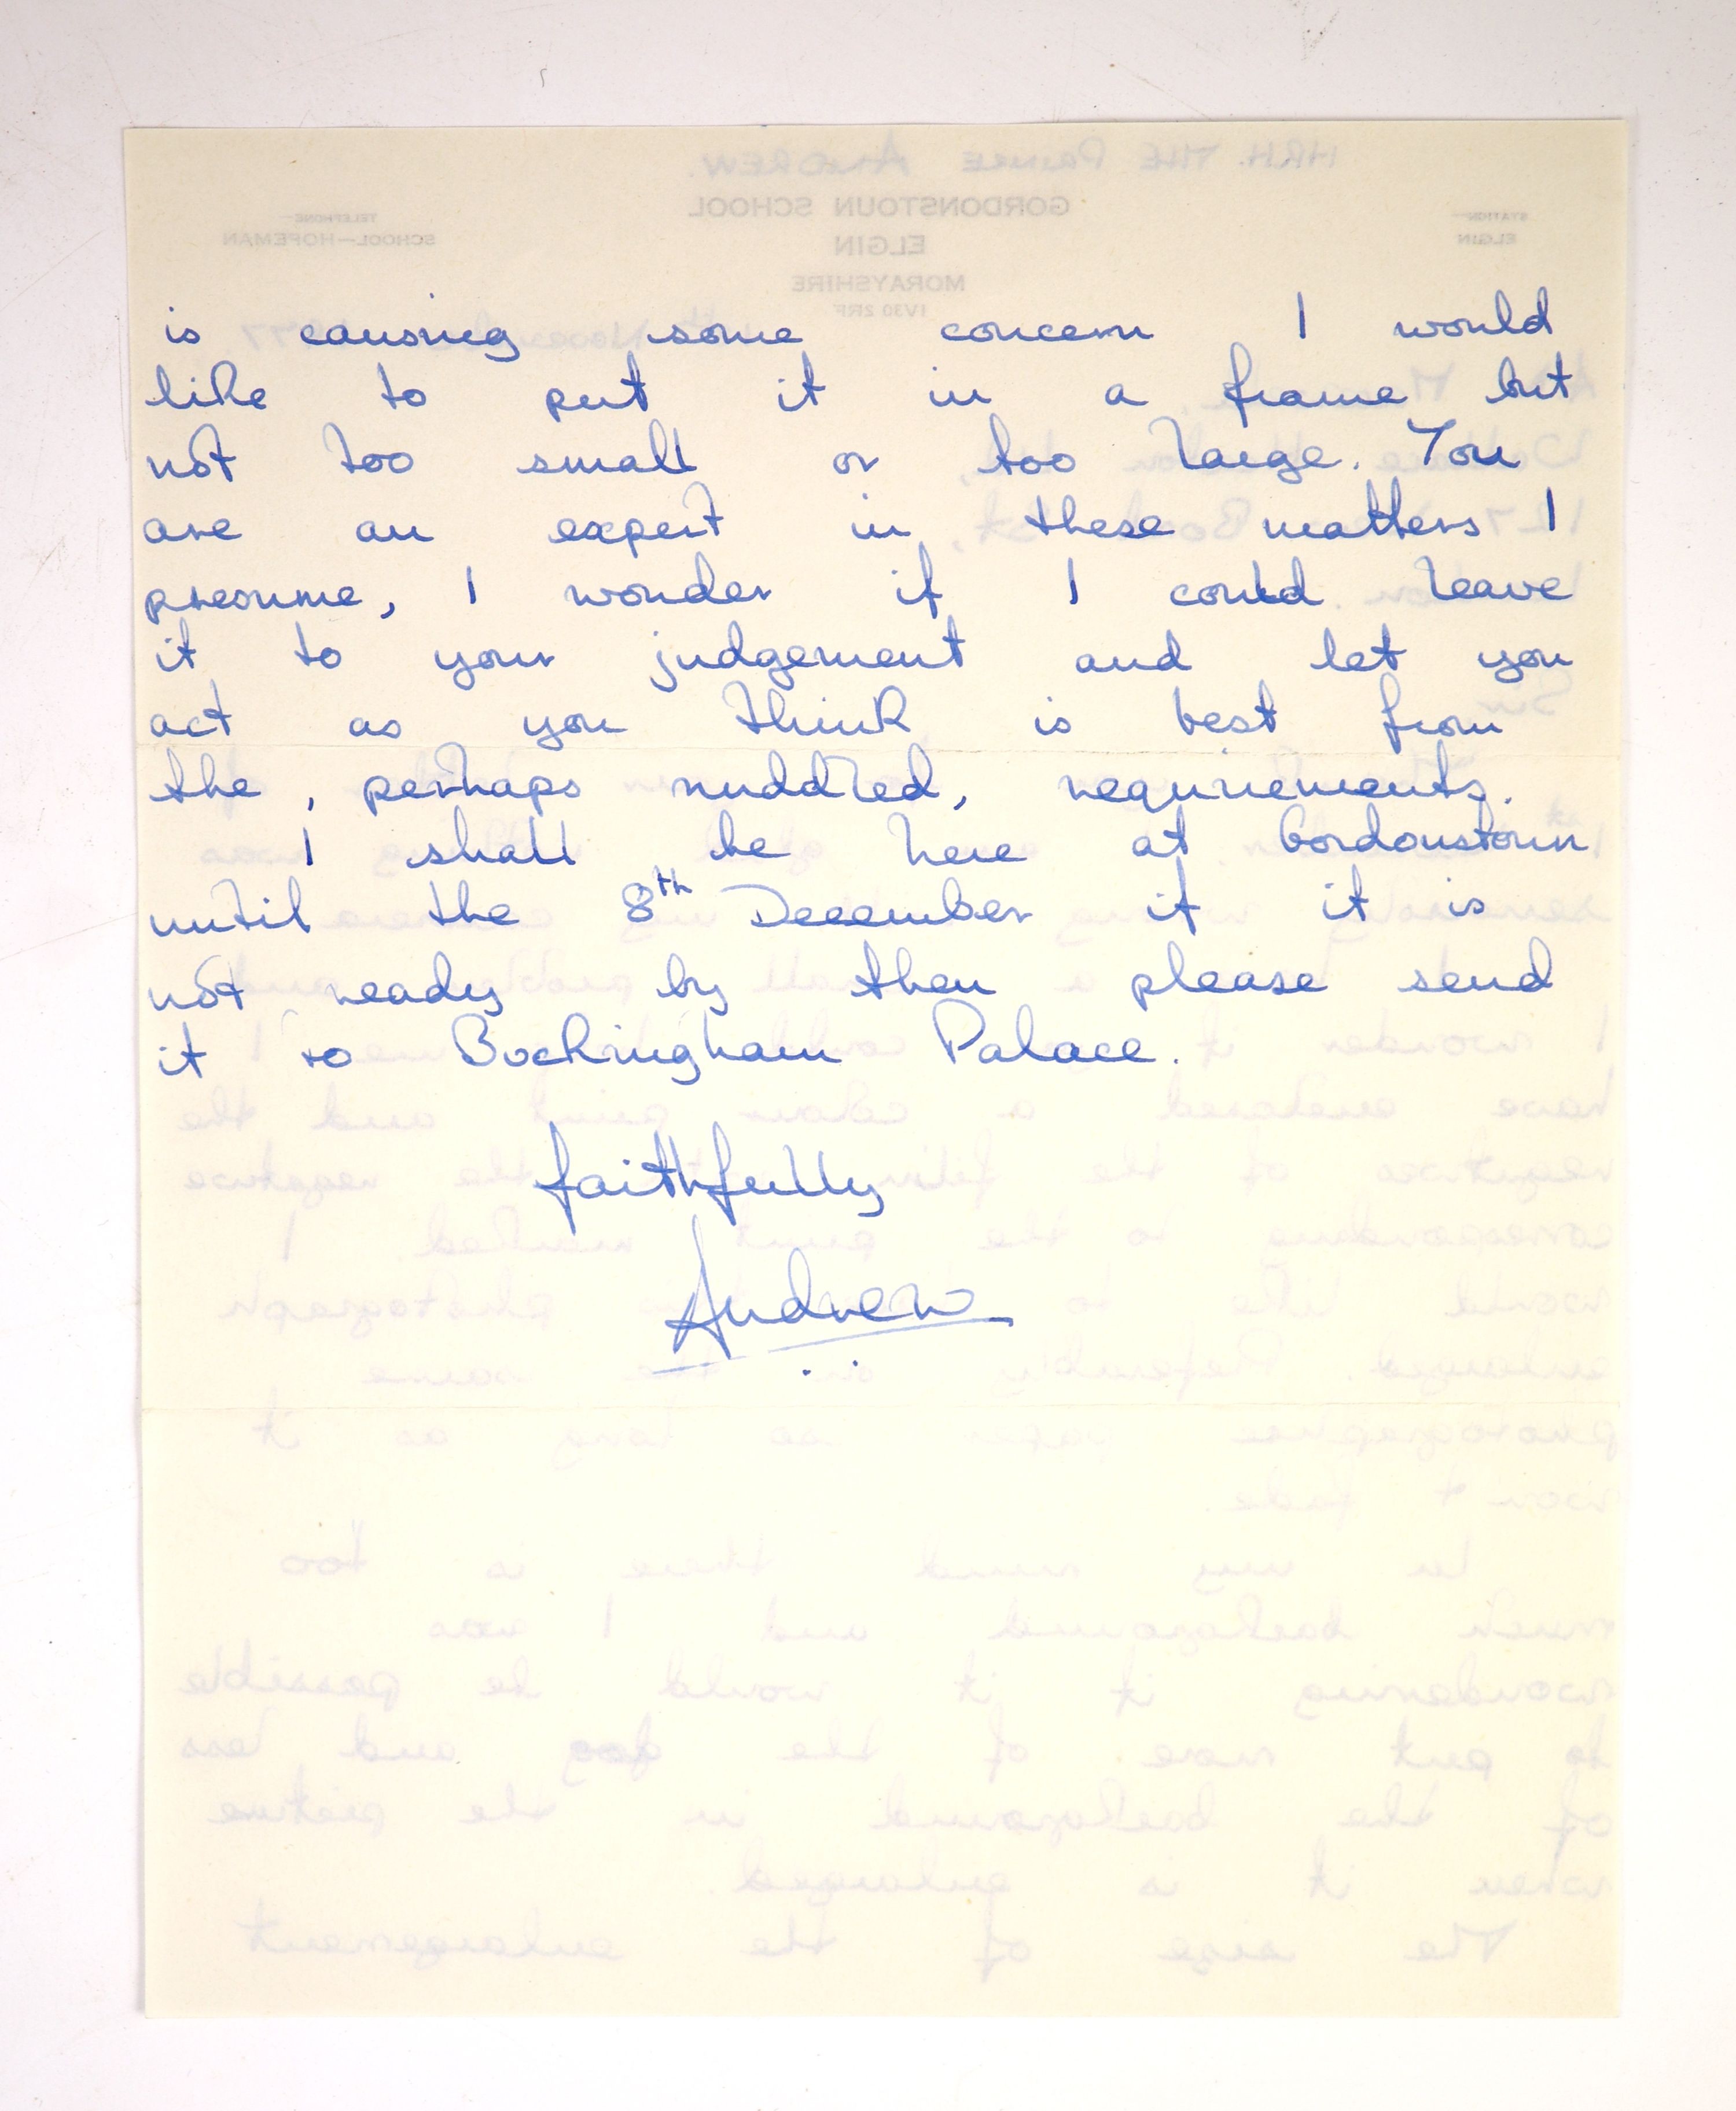 Royal Interest - an album of autograph letters to Alan Maxwell MVO, of the photographic and camera specialists, Wallace Heaton Ltd., official suppliers to the Royal Family